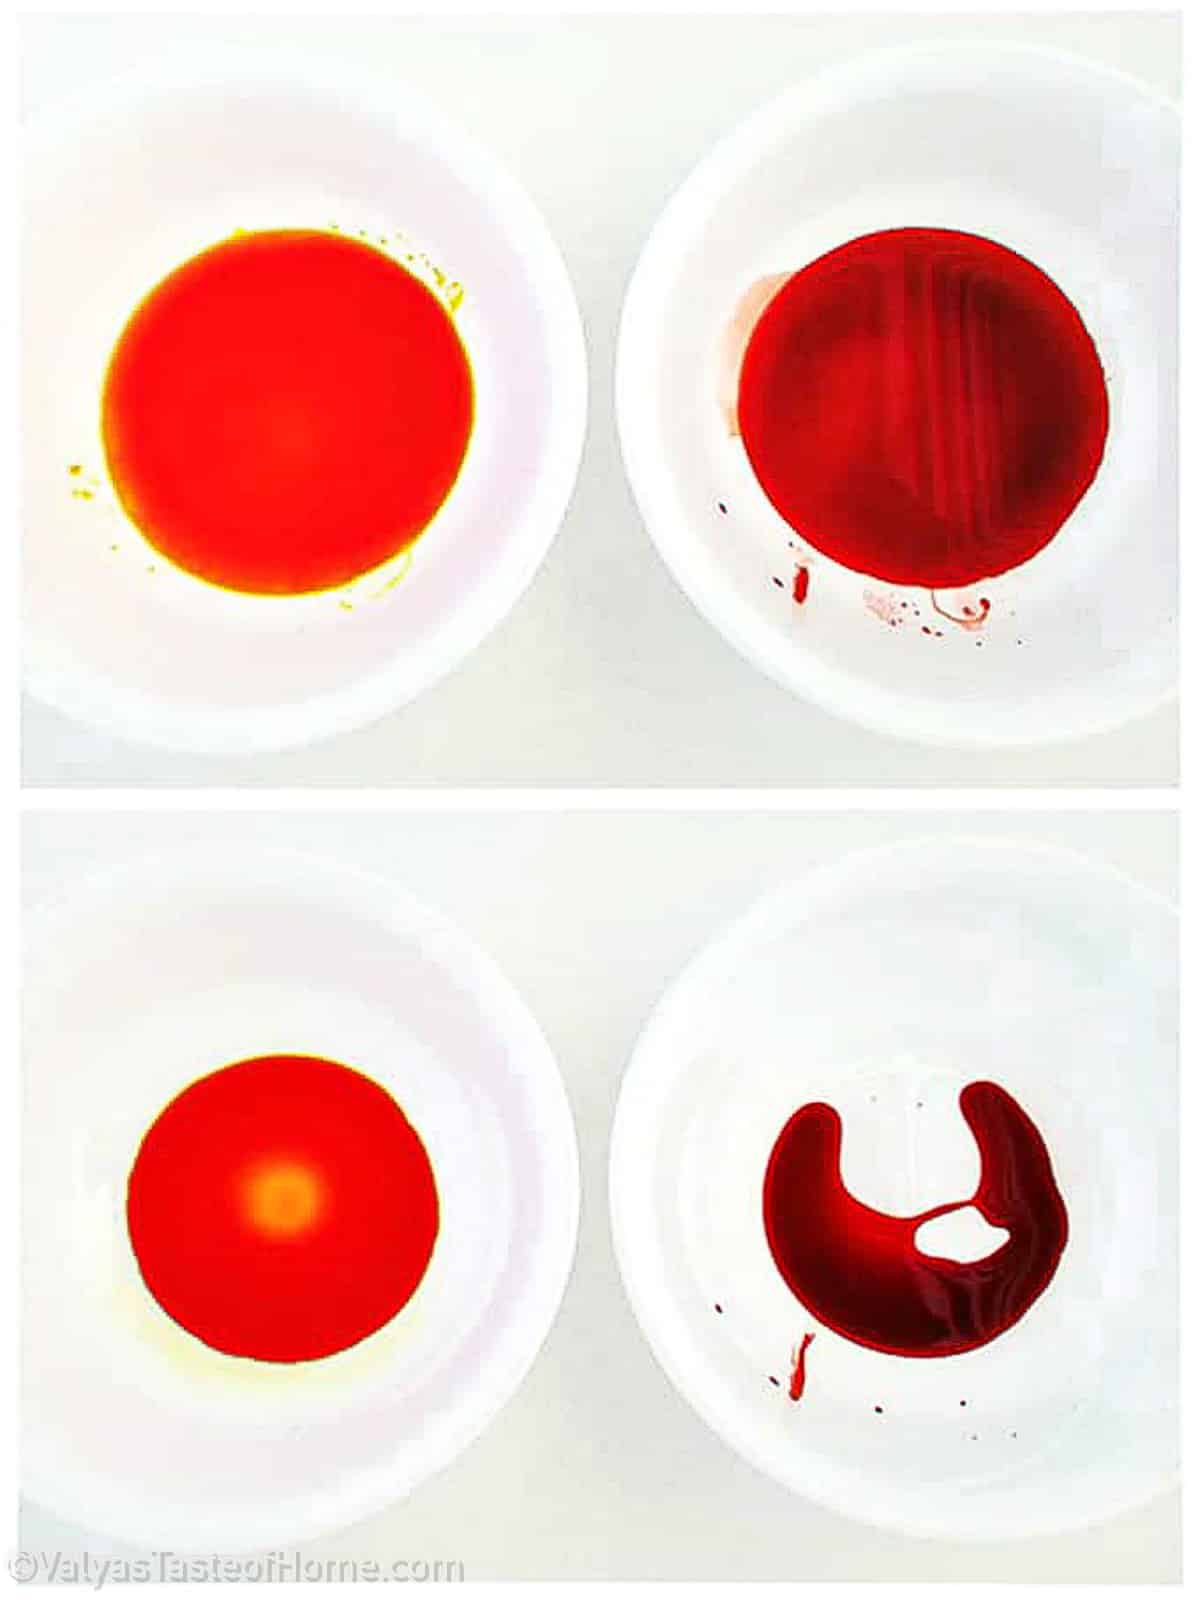 With the spoon in the red bowl, lift up the ball (do not roll it in the red color) to move it to the sugar coating plate.